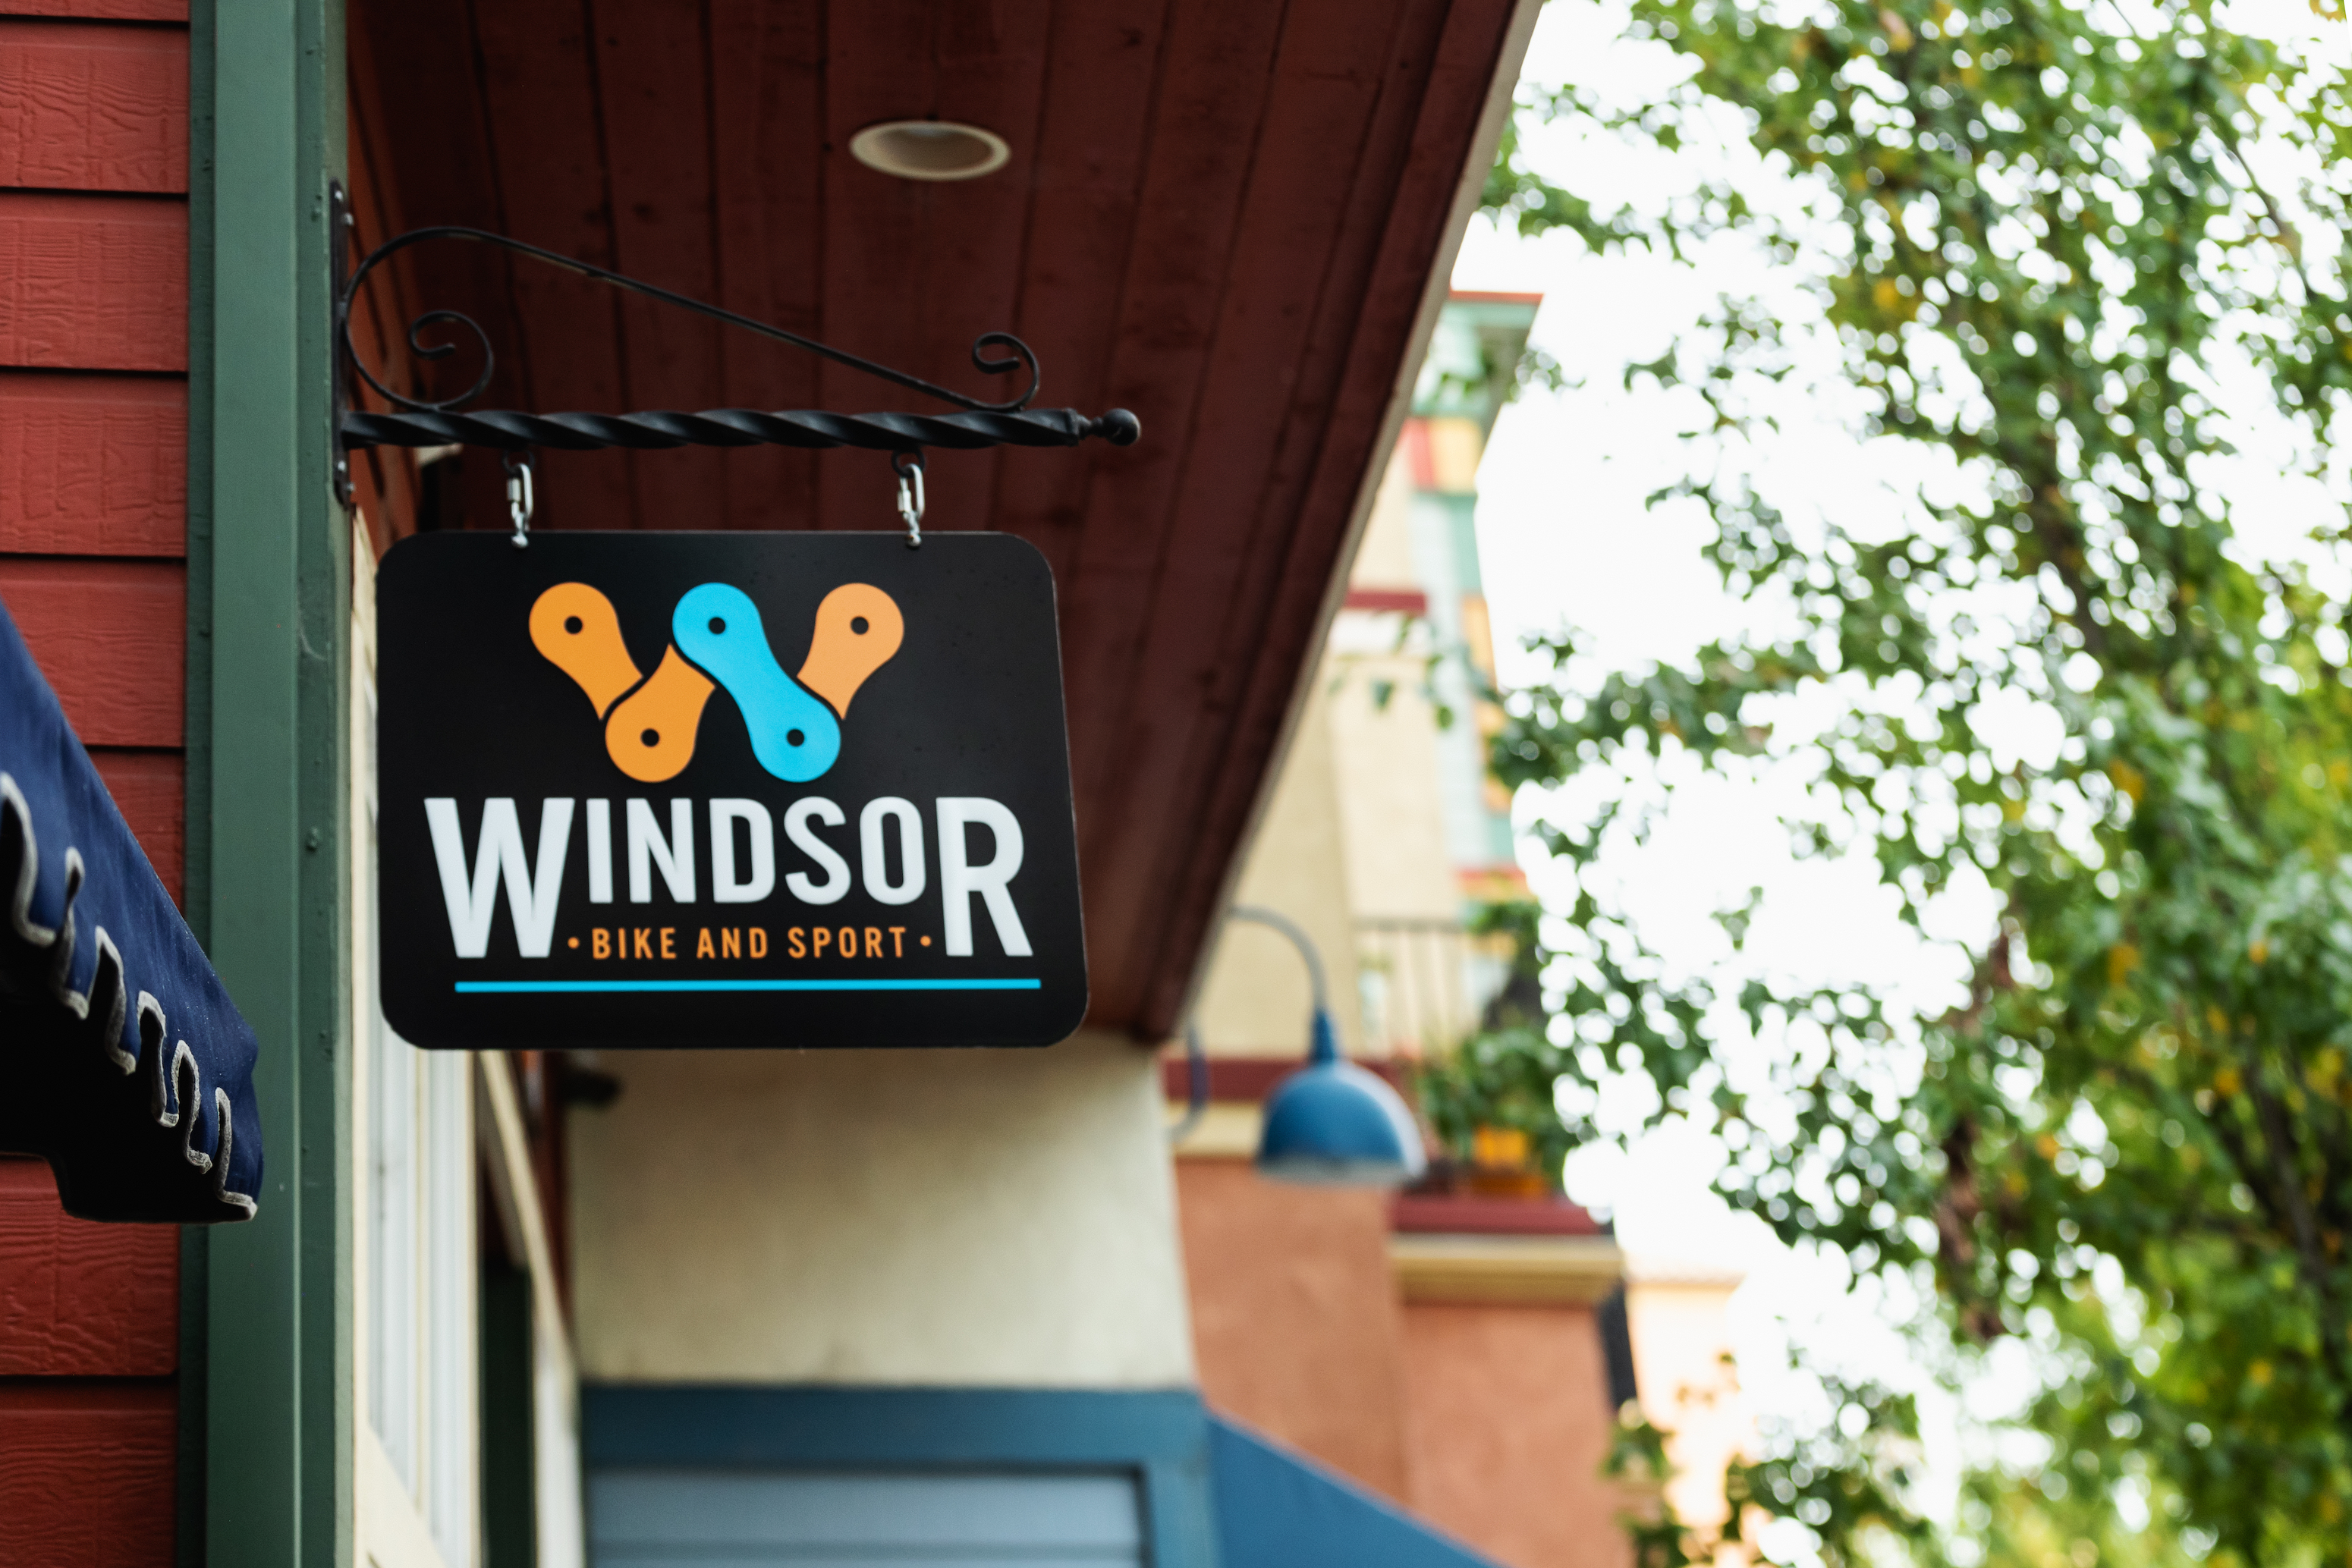 cities_towns_Windsor_by_Wildly_Simple_Sonoma_County_043